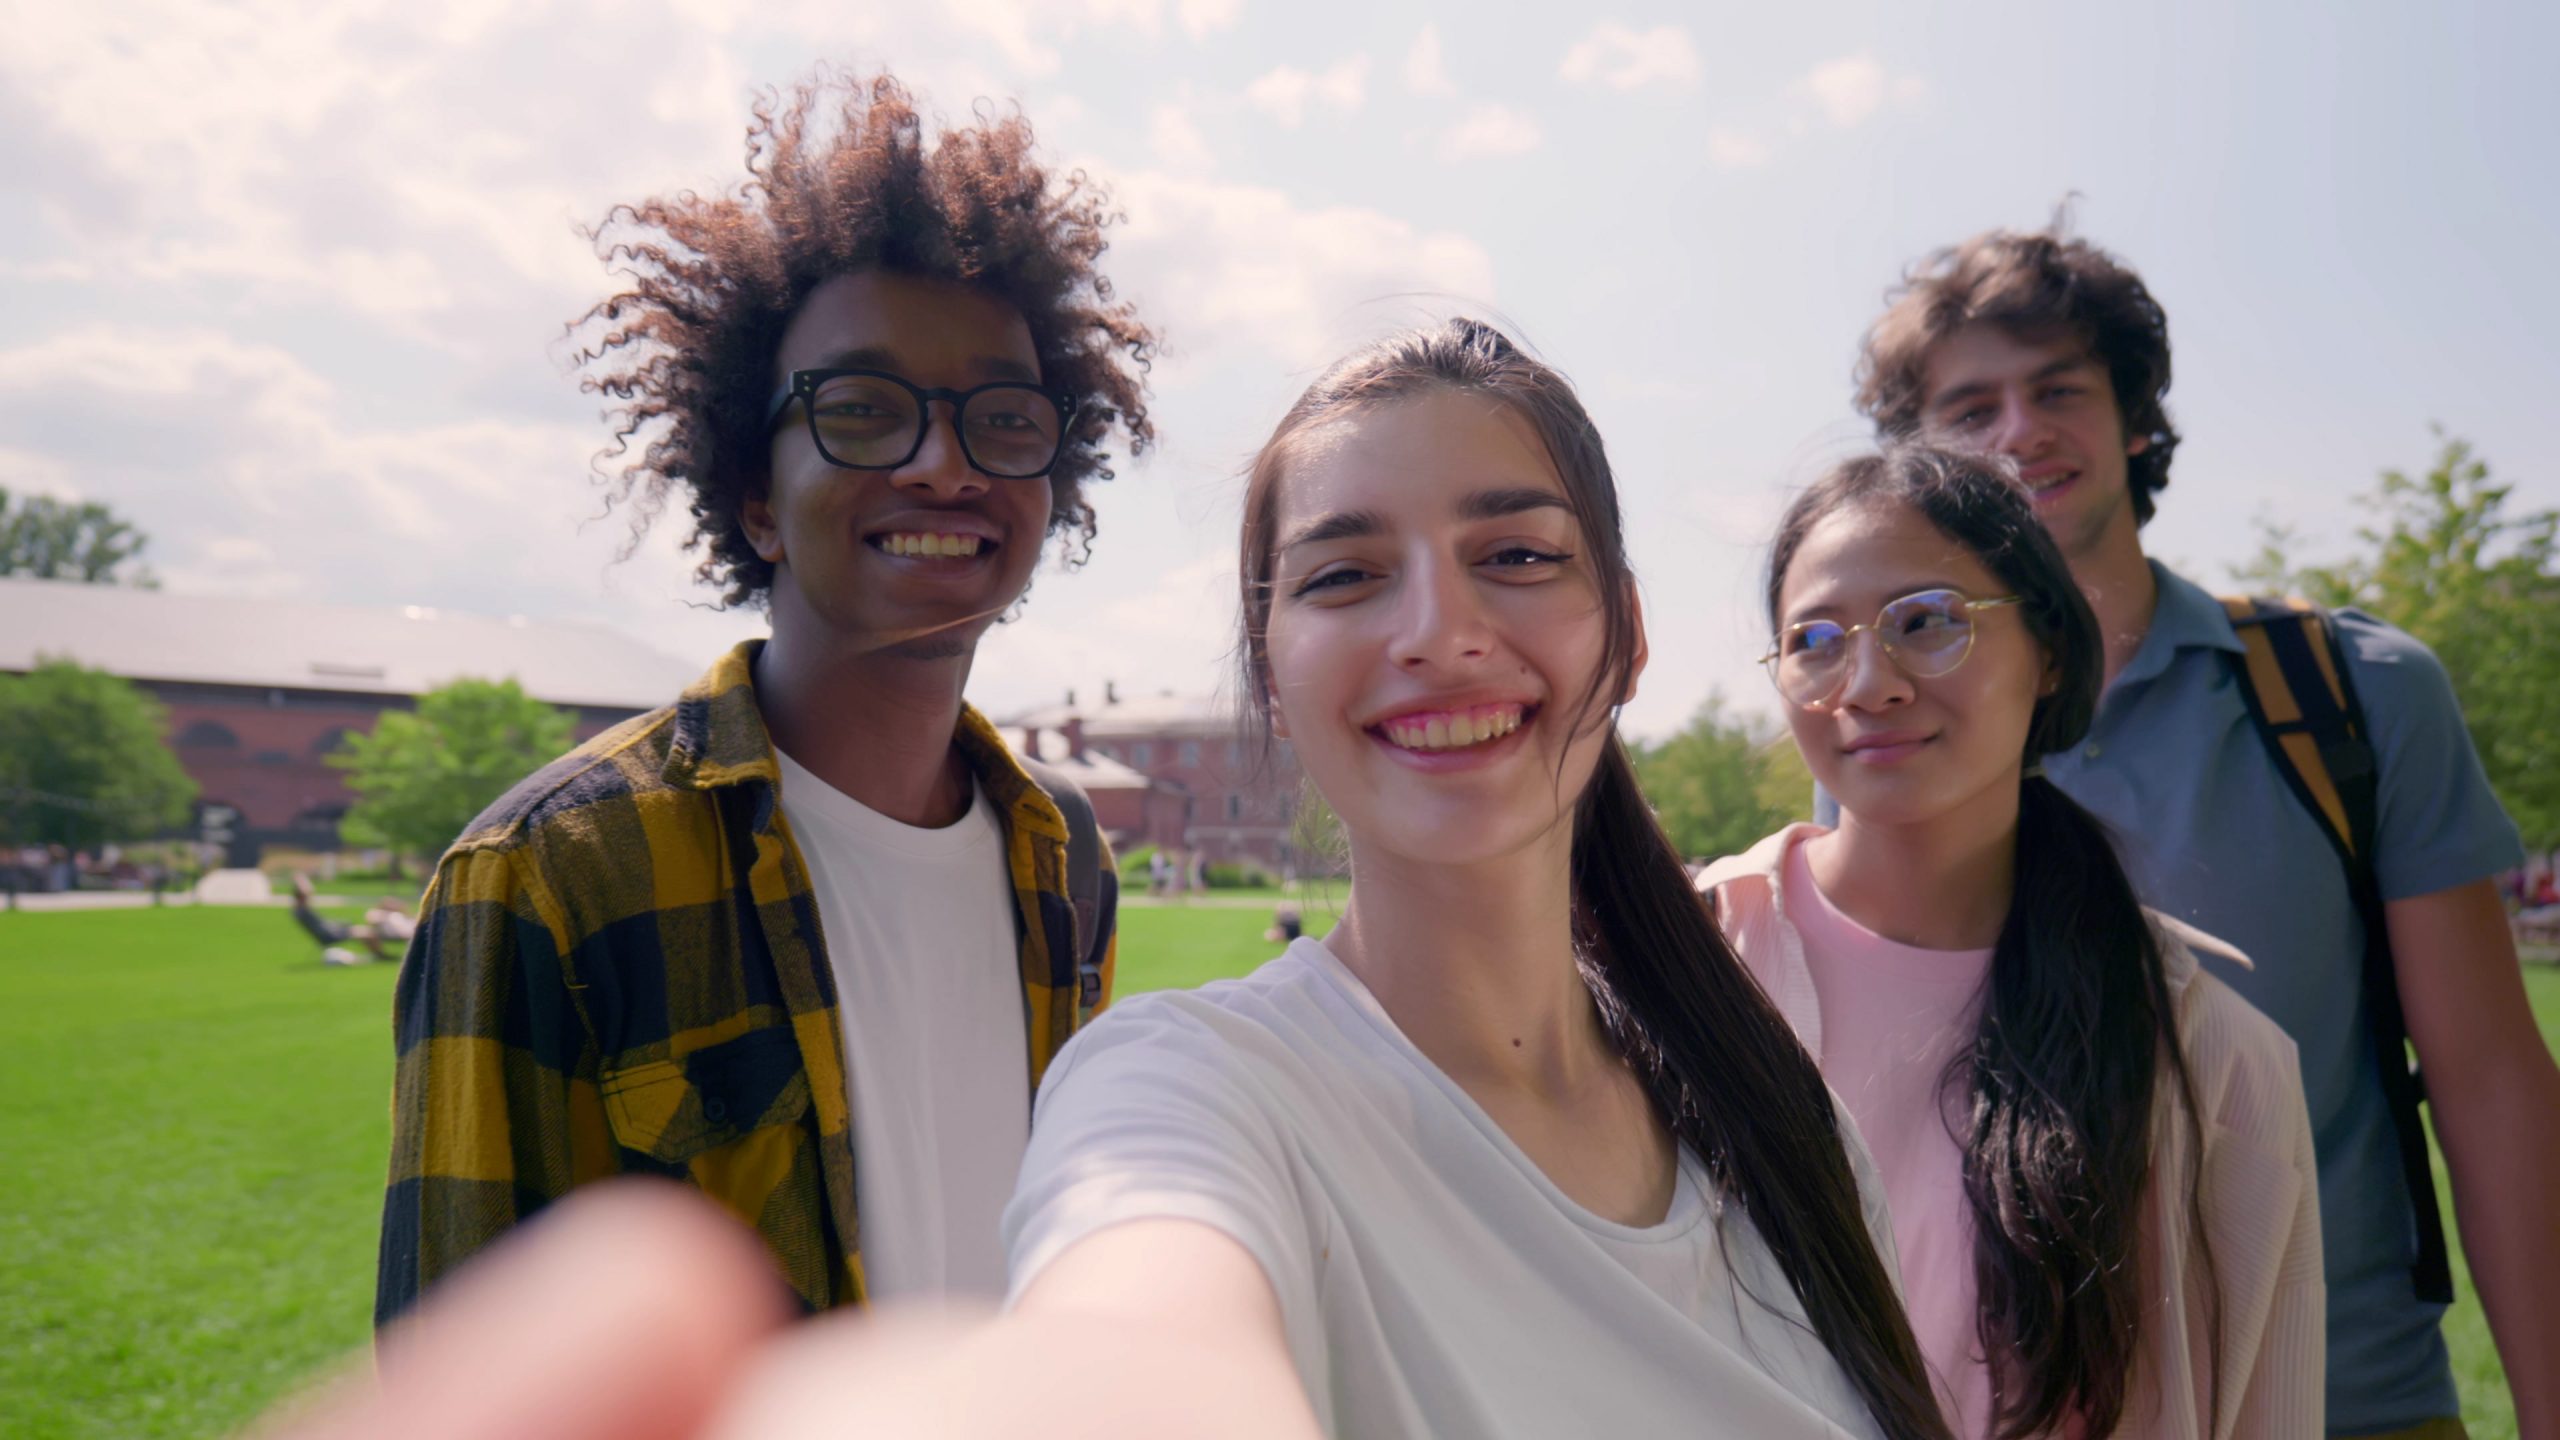 Pov shot of multiethnic young friends having video call or taking selfie together in park. Diverse young people looking at camera and talking standing outdoors